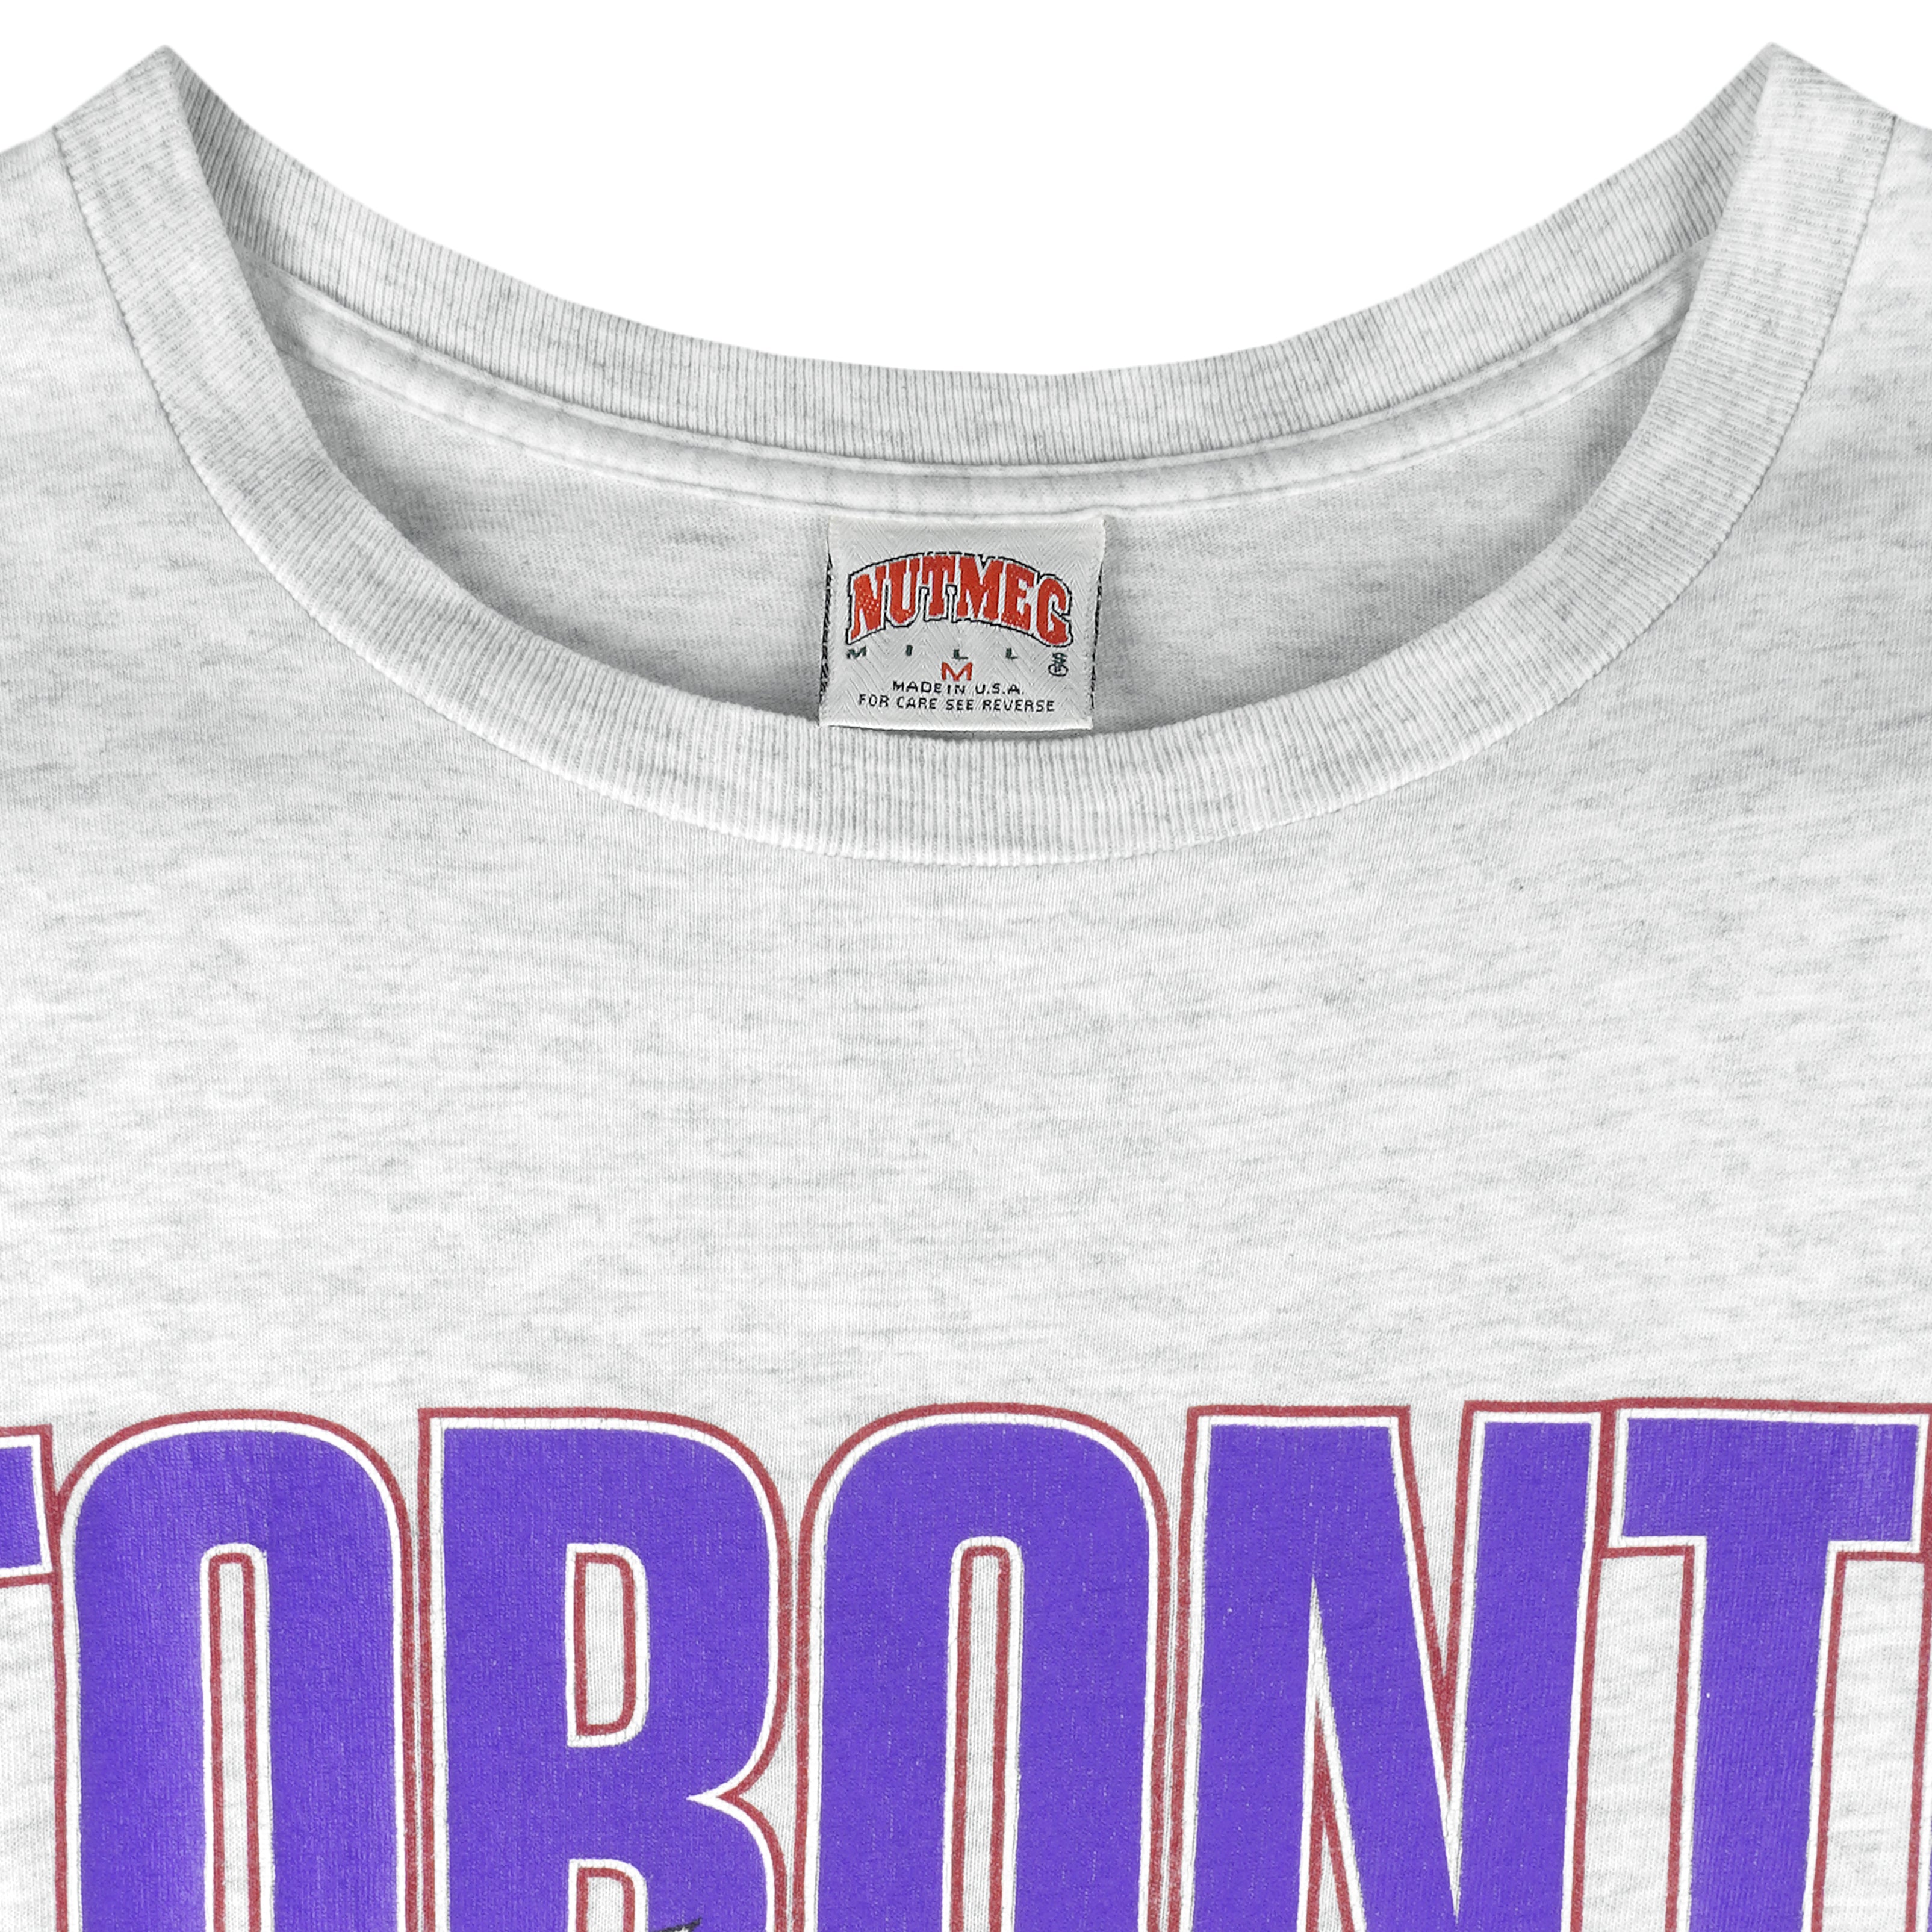 Streetwear brands that showed out for the Toronto Raptors NBA